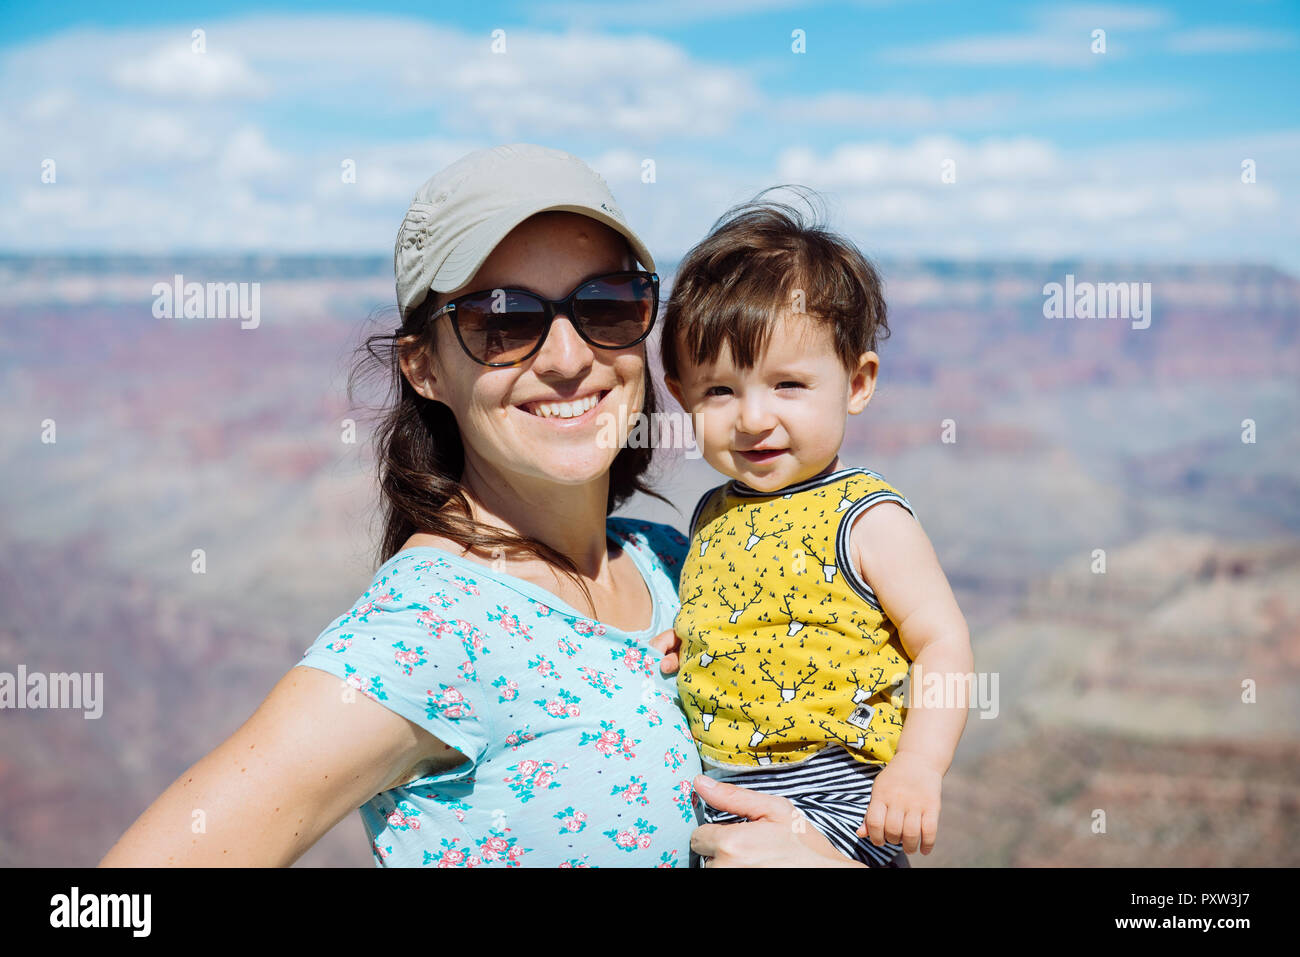 USA, Arizona, Grand Canyon National Park, Grand Canyon, Portrait of mother and little daughter Stock Photo